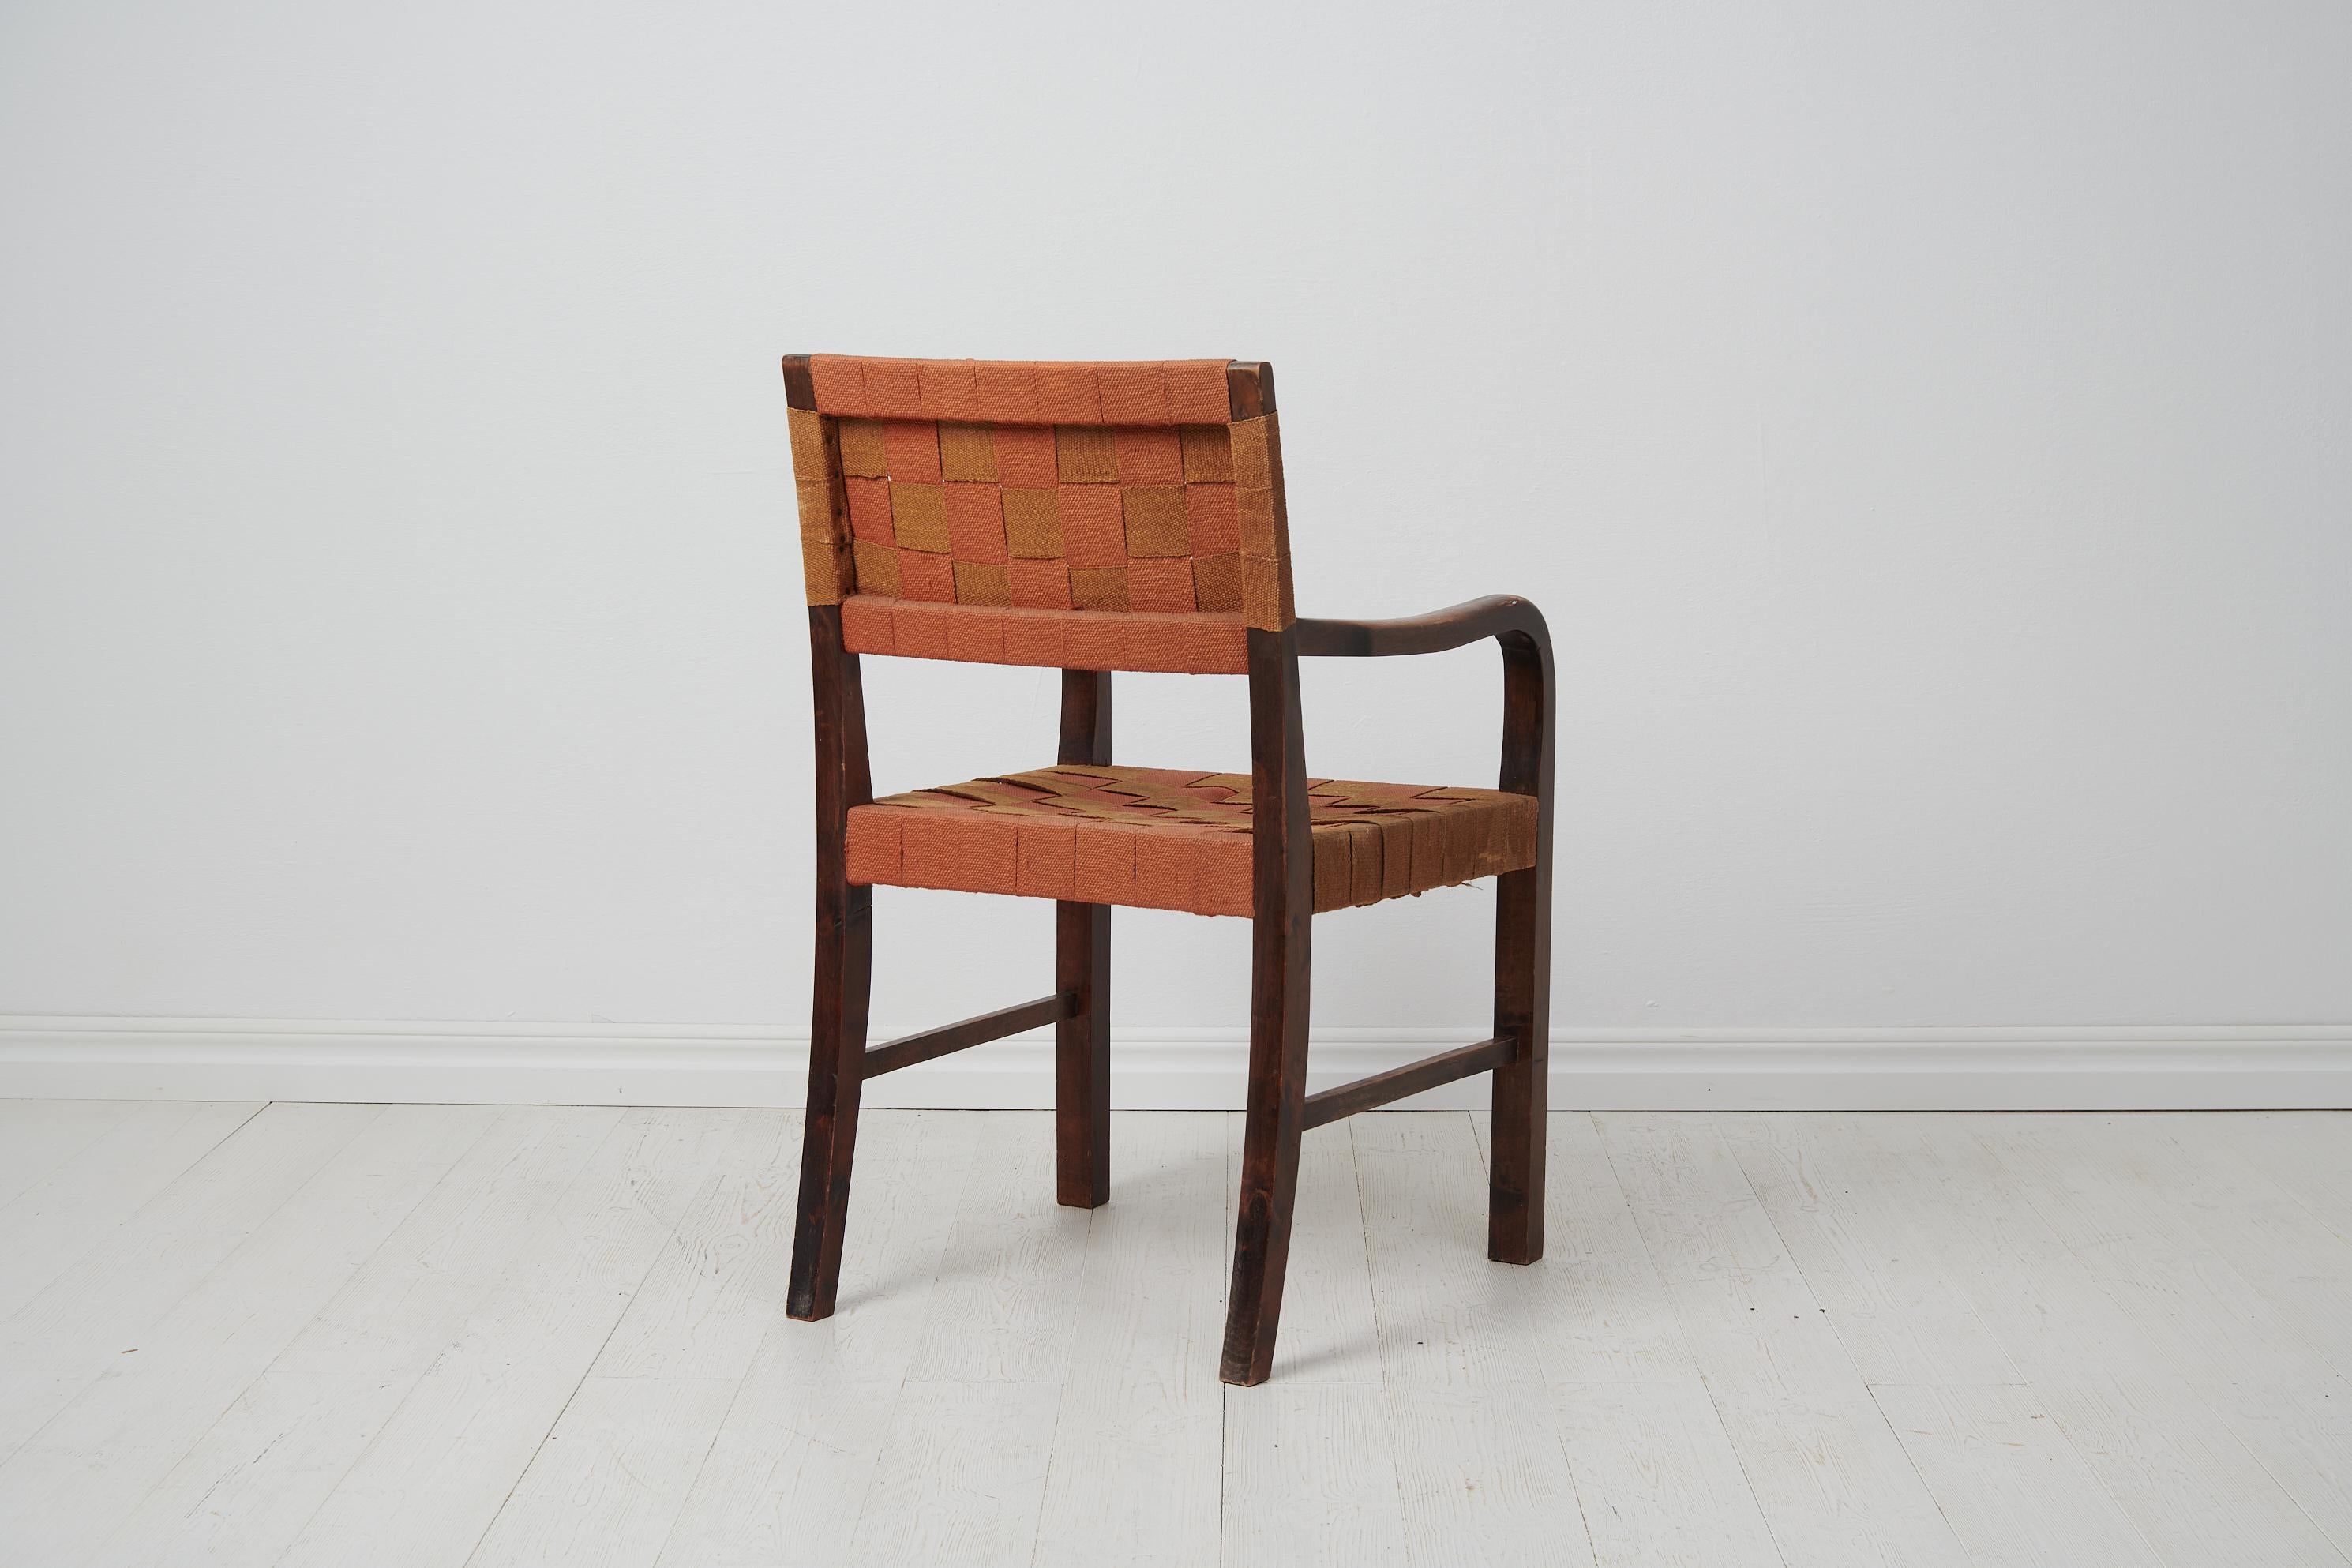 Swedish Modern Vintage Armchair, 1920 to 1930 In Good Condition For Sale In Kramfors, SE